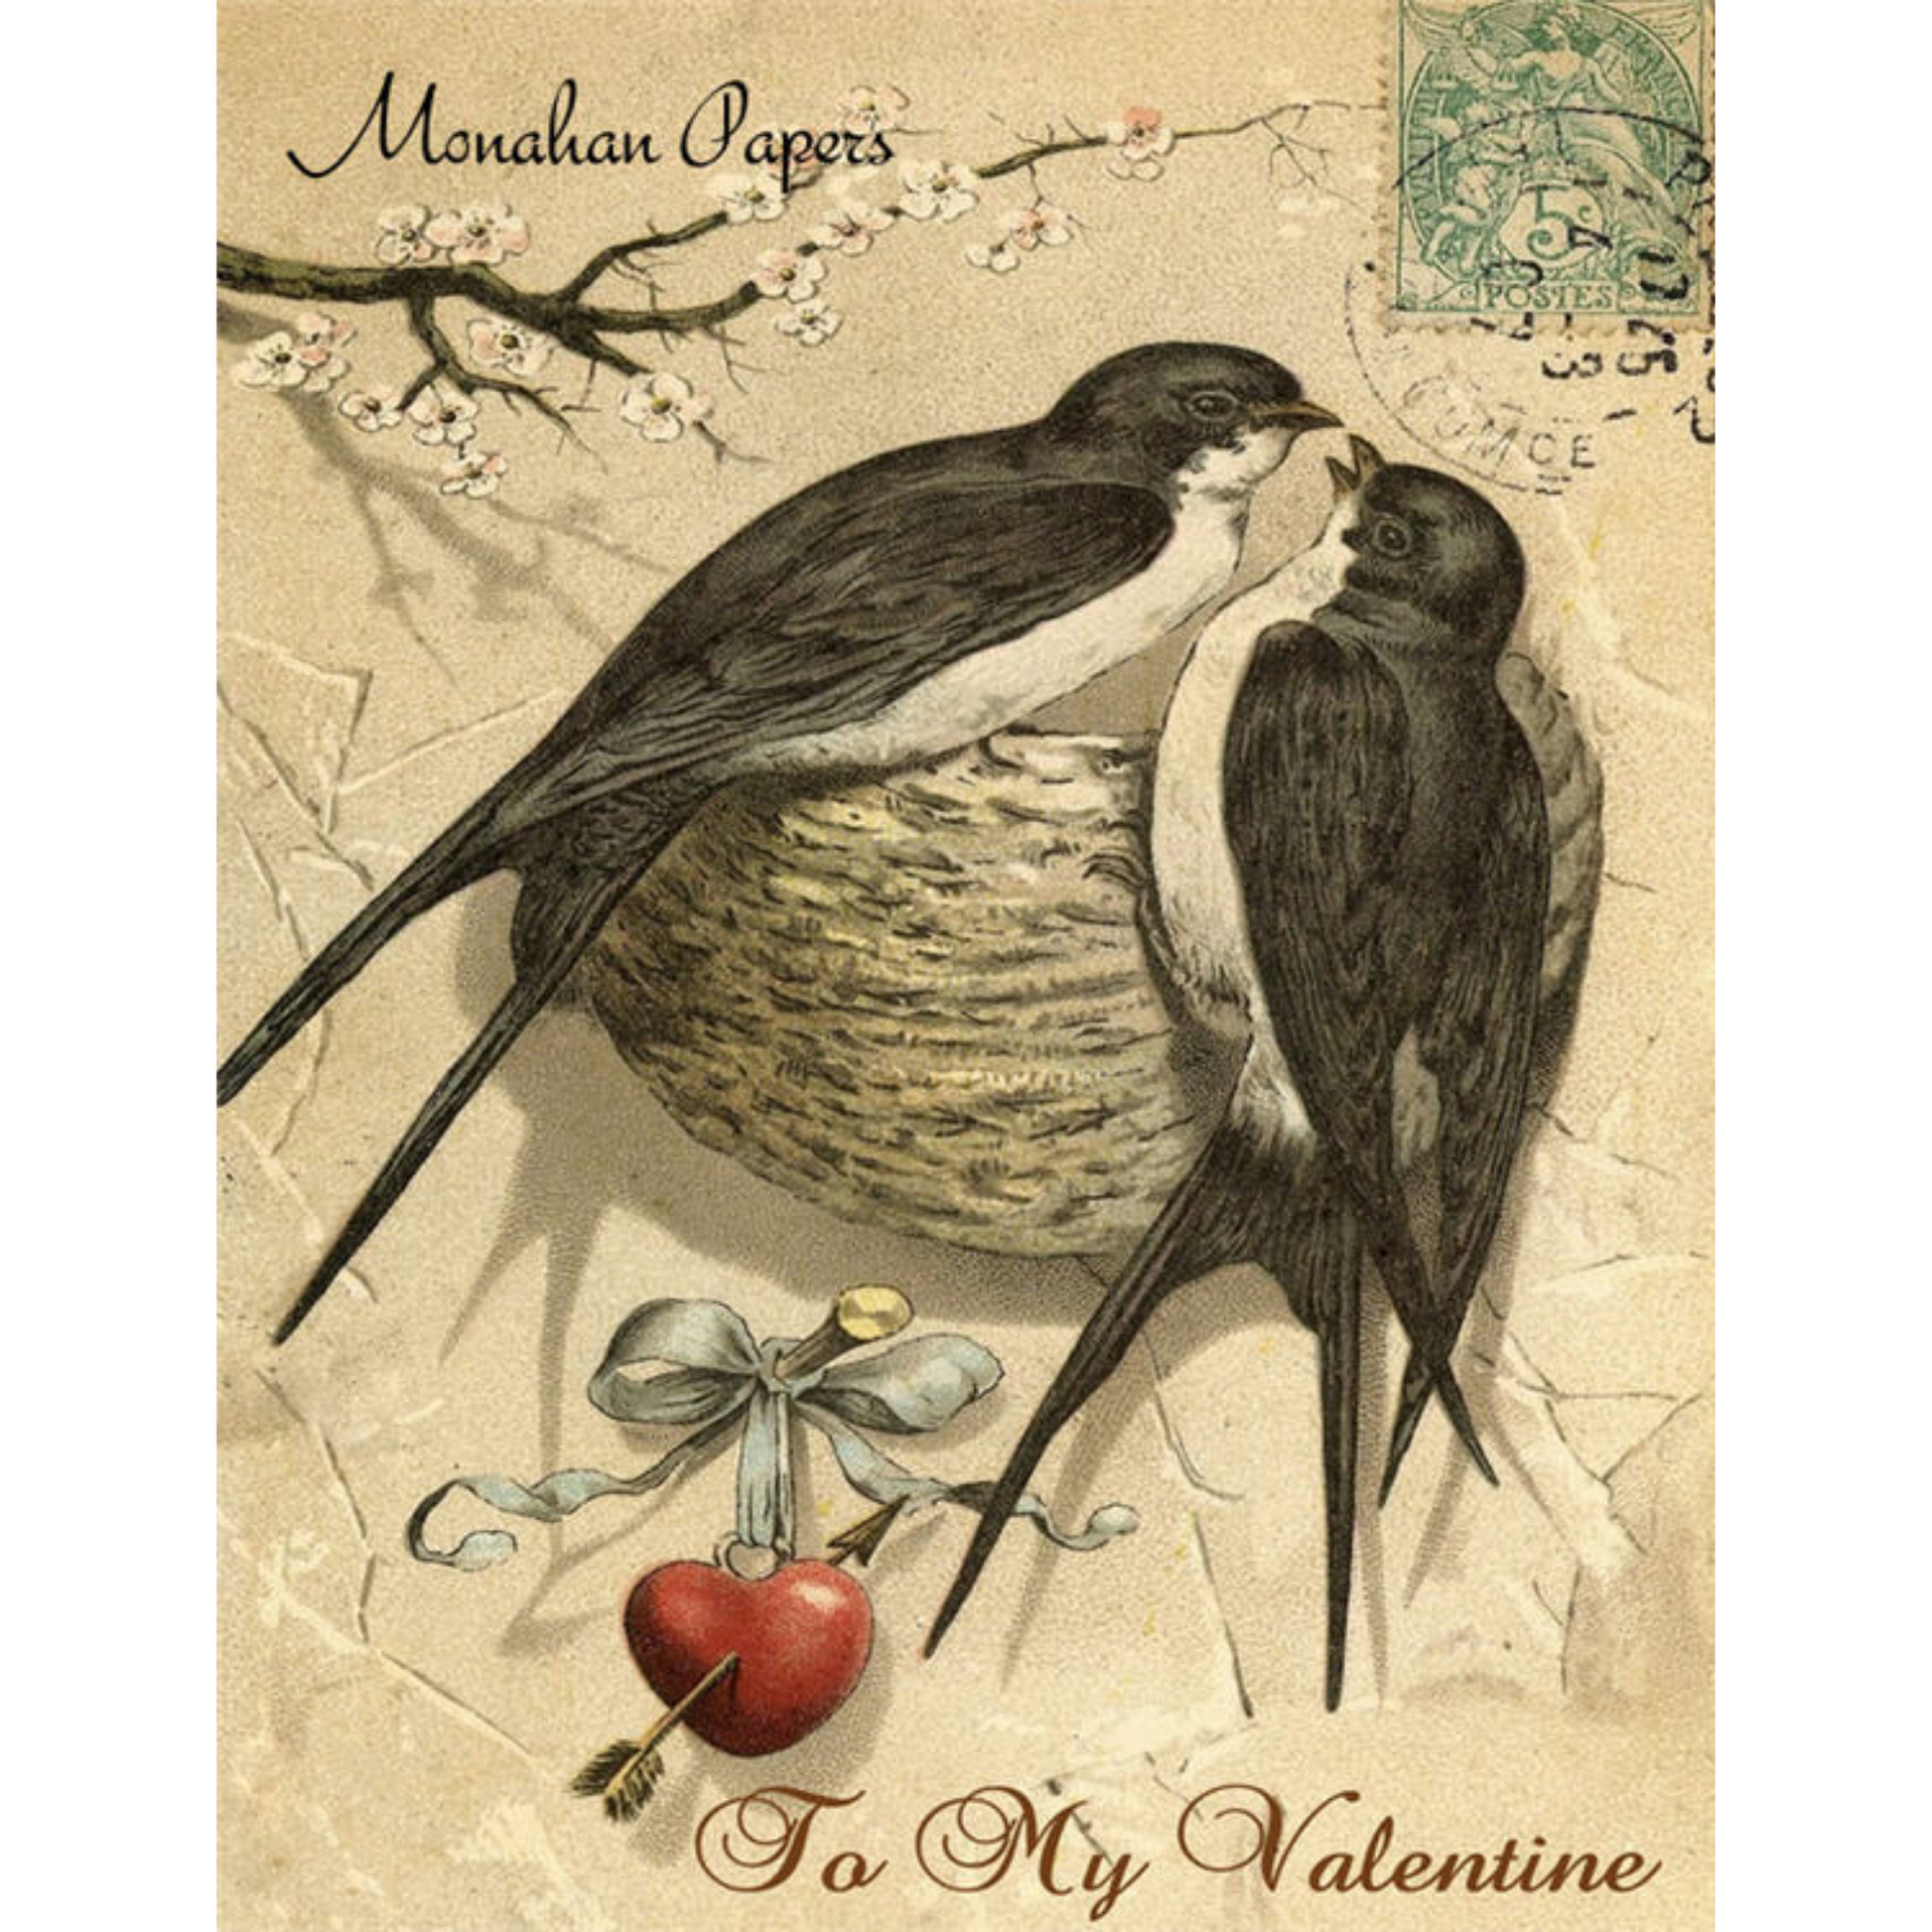 To My Valentine-V34 decoupage paper by Monahan Papers available at Milton's Daughter. Pair of birds building a nest-Valentine's Day motif, 11" x 17"